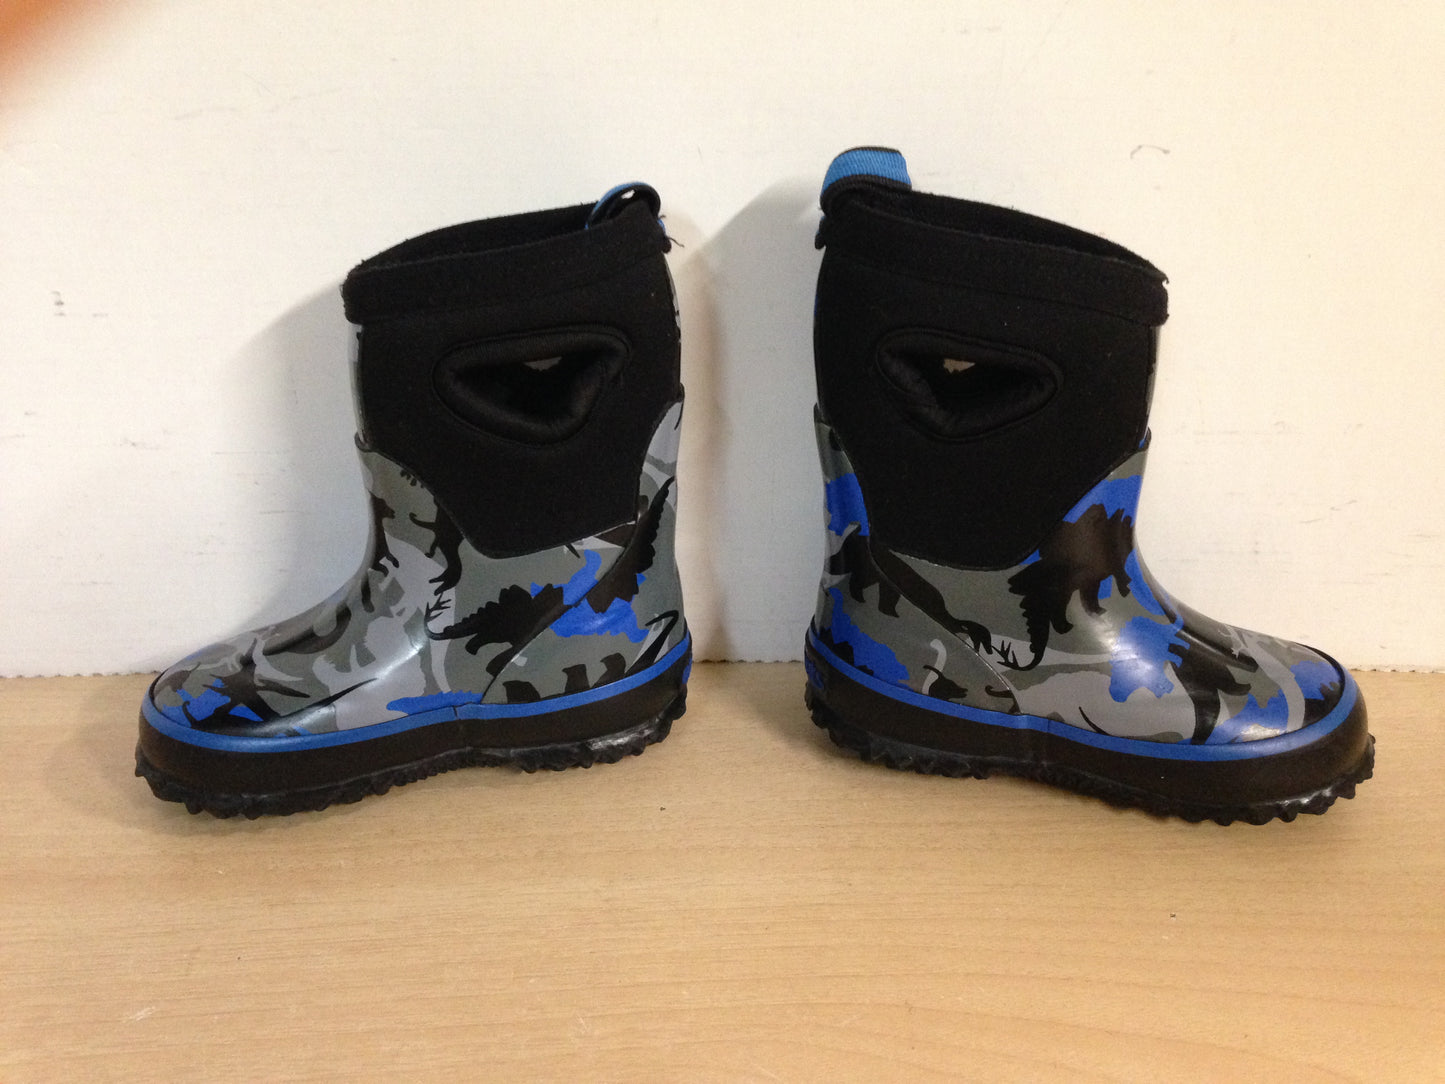 Bogs Style Child Size 5 Toddler Neoprene Rubber Rain Winter Boots Multi Black and Blue As New